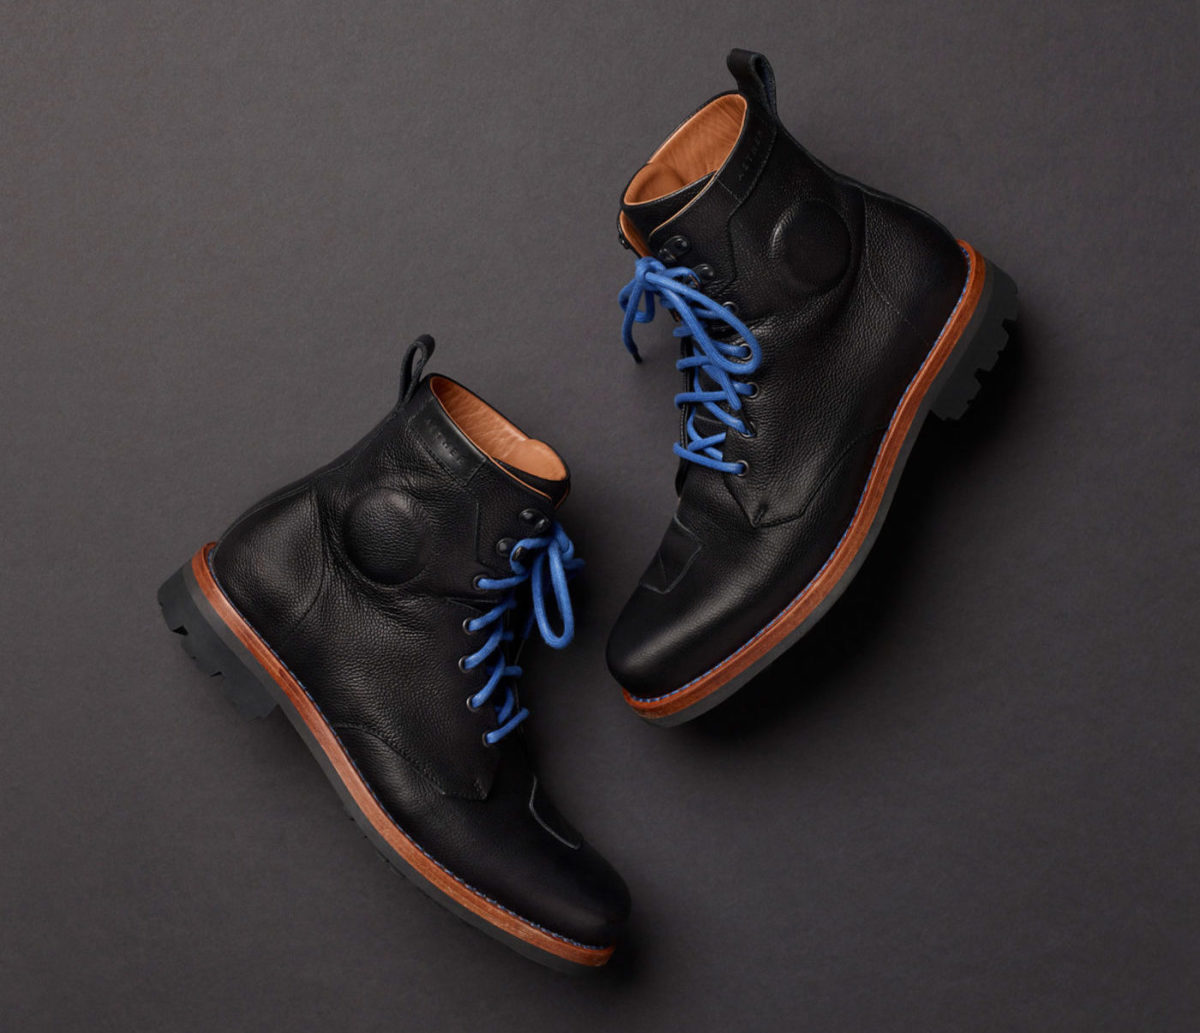 Aether Moto Boot